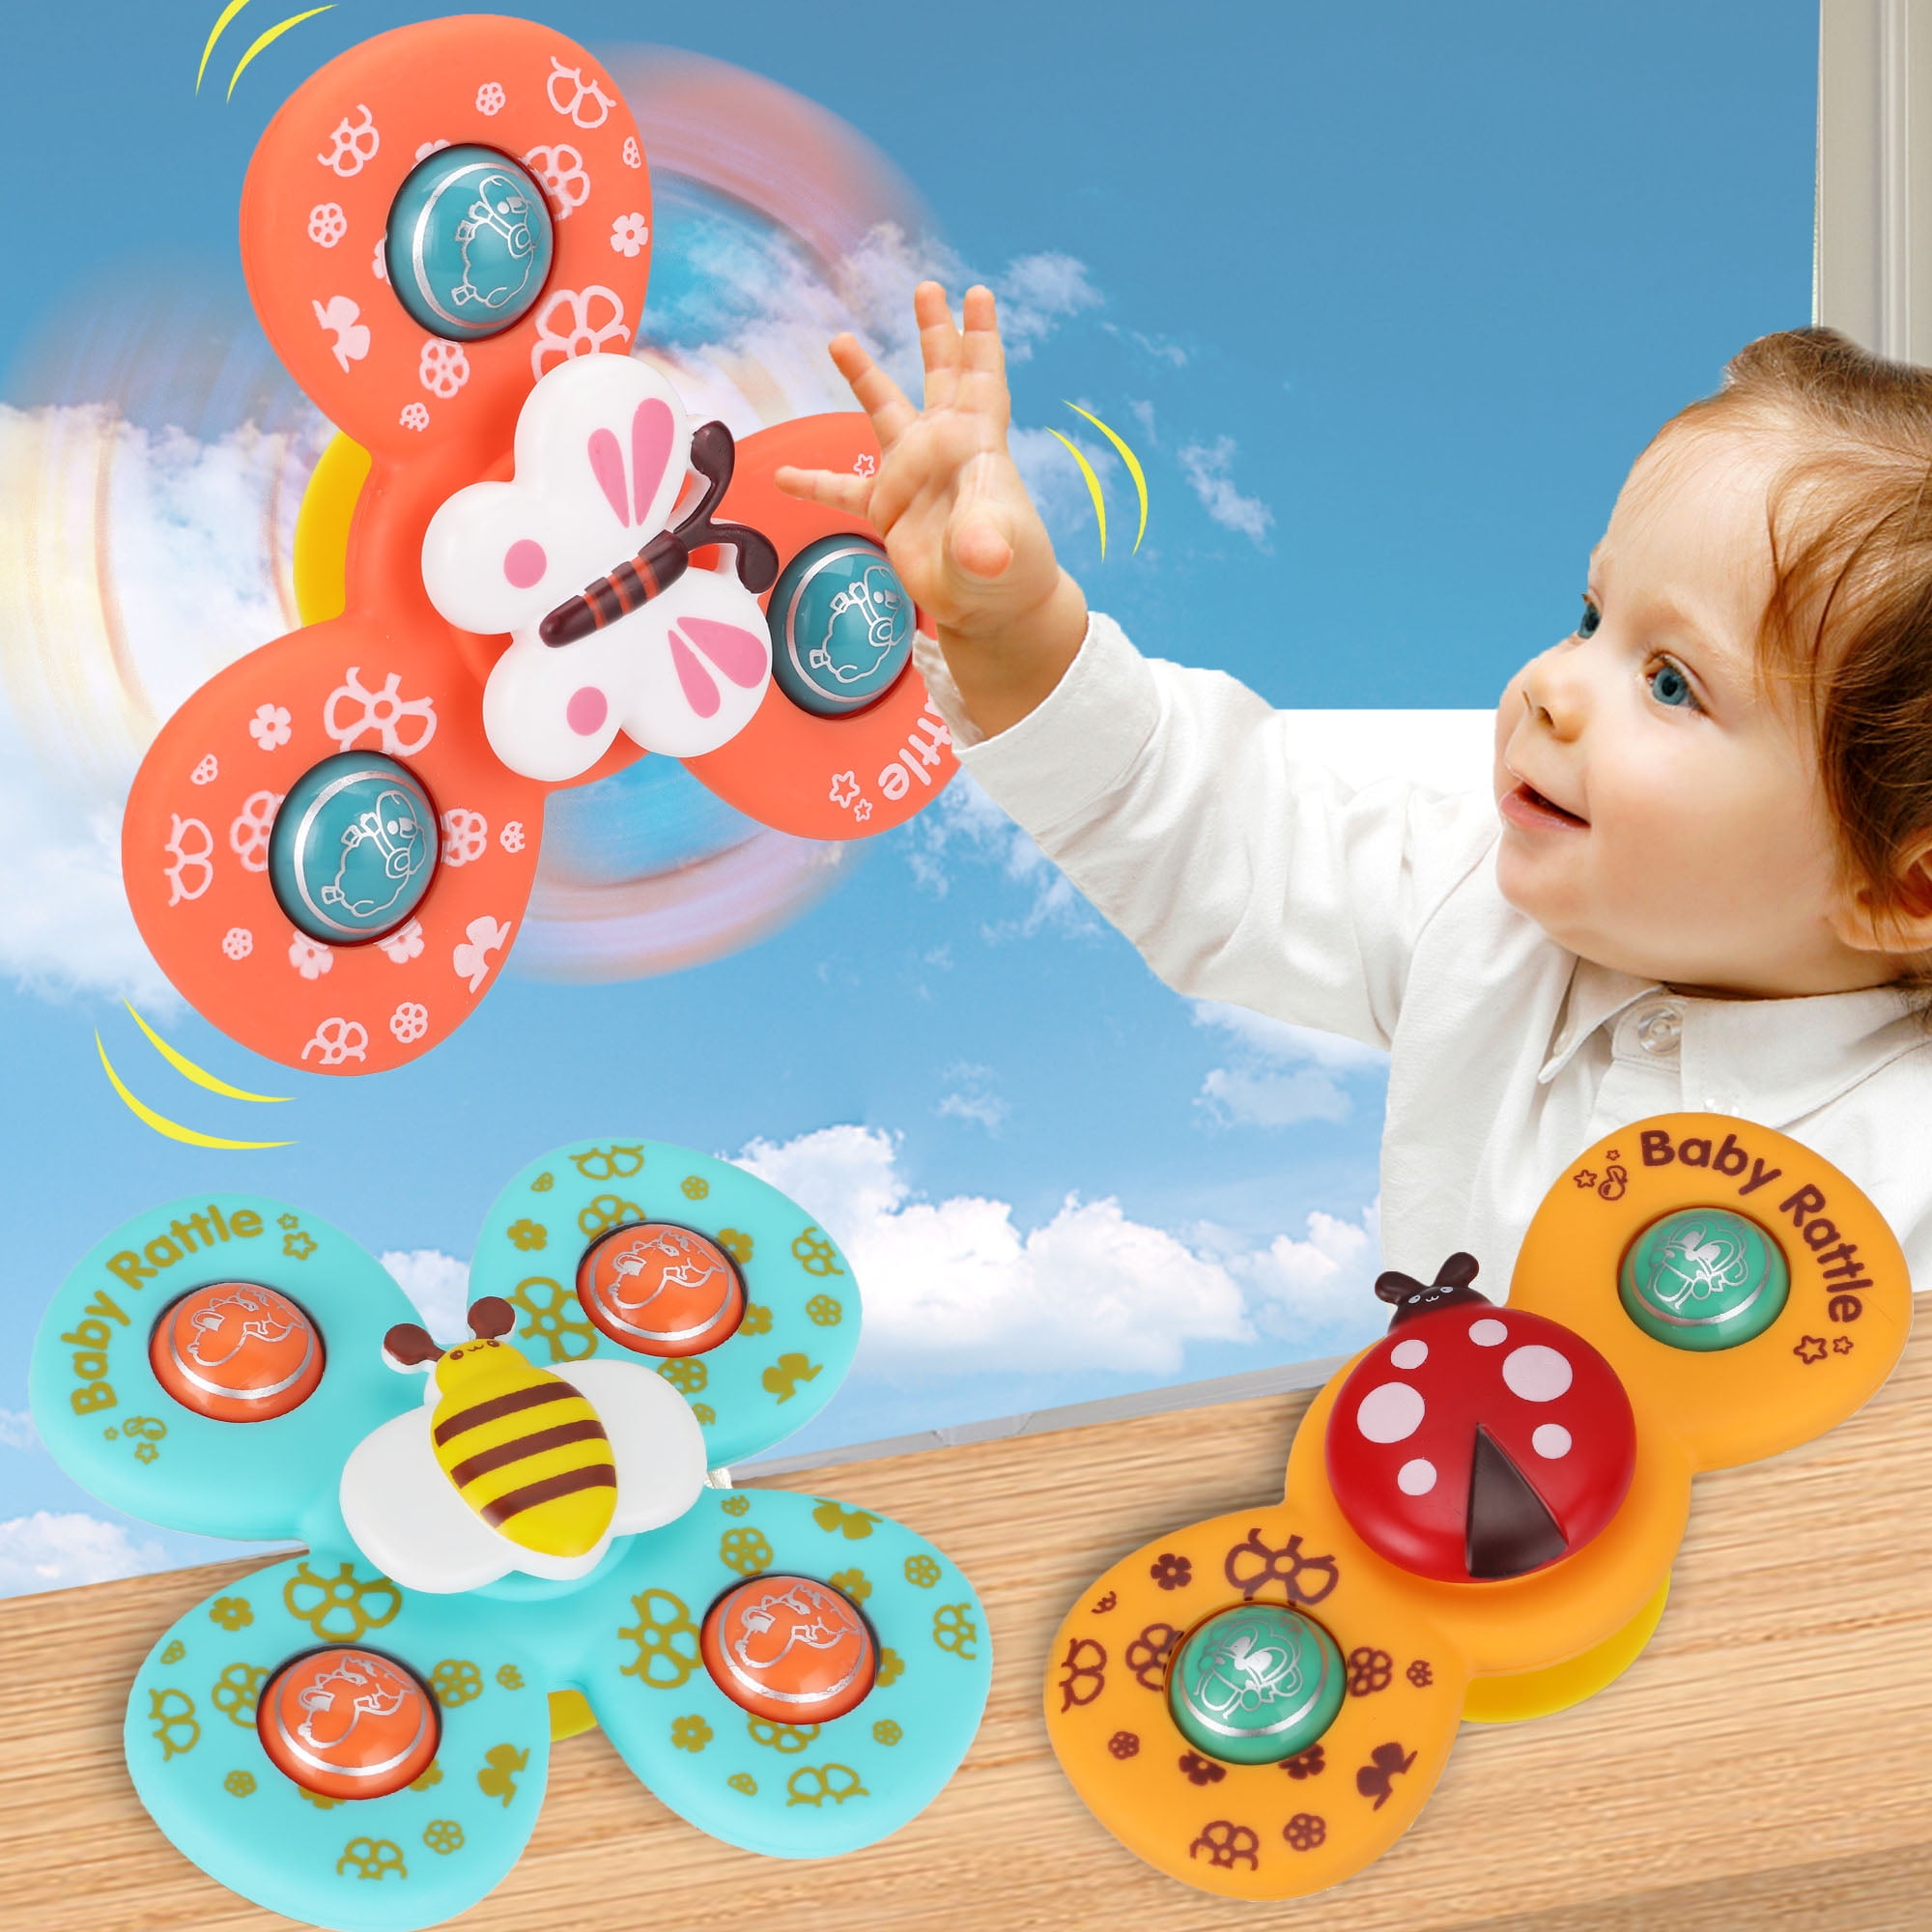 Spin Sucker Spinning Top Spinner Toy Tomsi Suction Cup Spinning Top Toy A Safe Interesting Table Sucker Creative Early Educational Toys for Toddler Baby Kids Girls Boys 